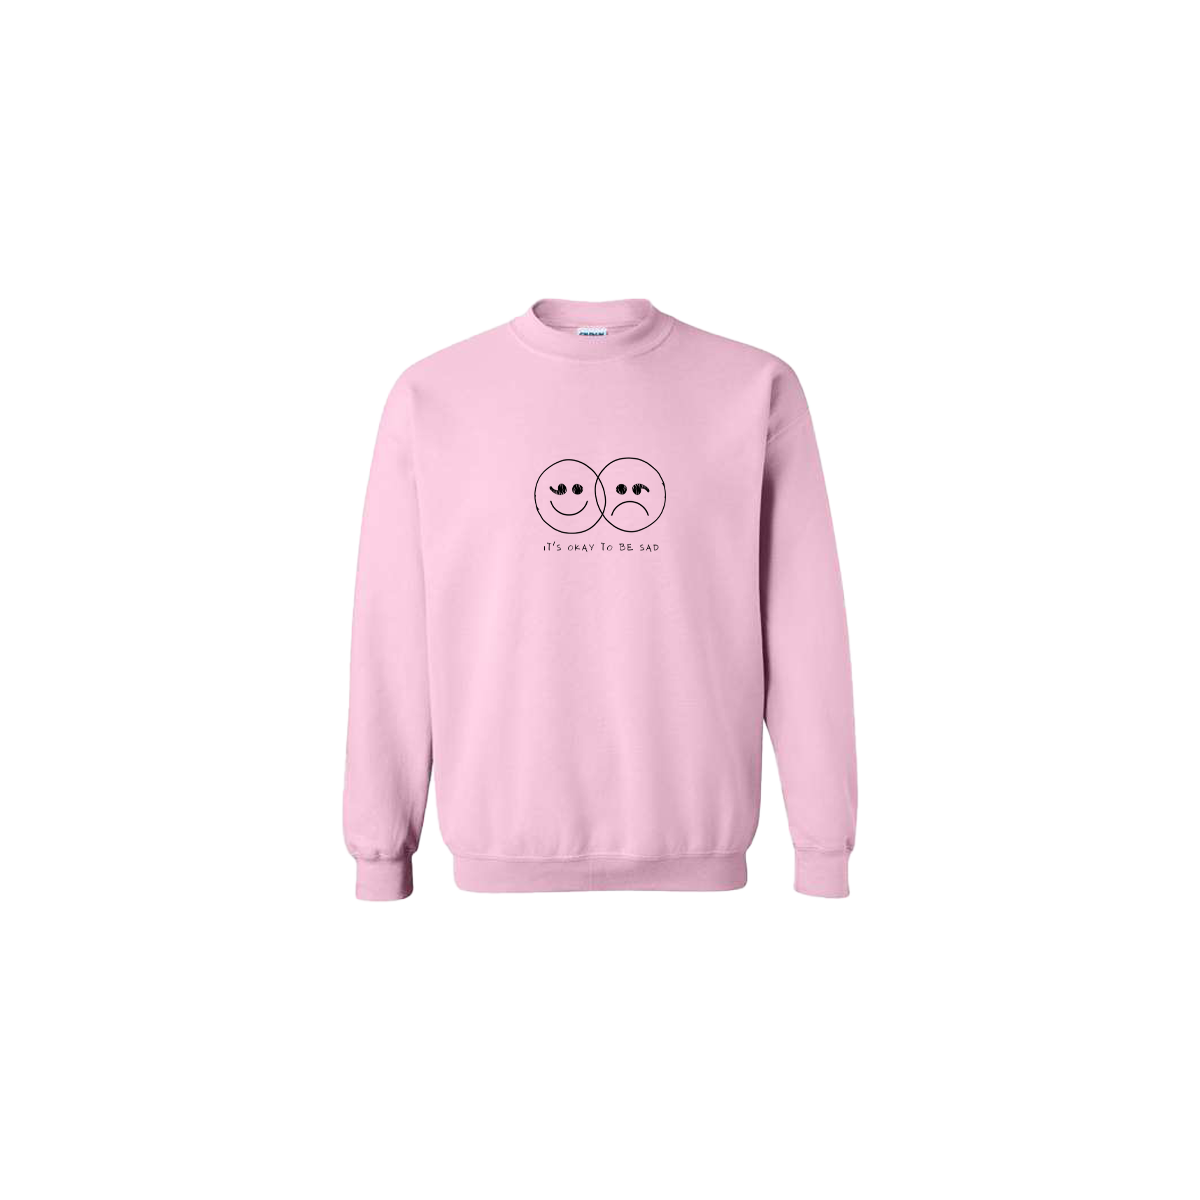 It's Okay to be Sad Double Smiley Face Embroidered Light Pink Crewneck - Mental Health Awareness Clothing